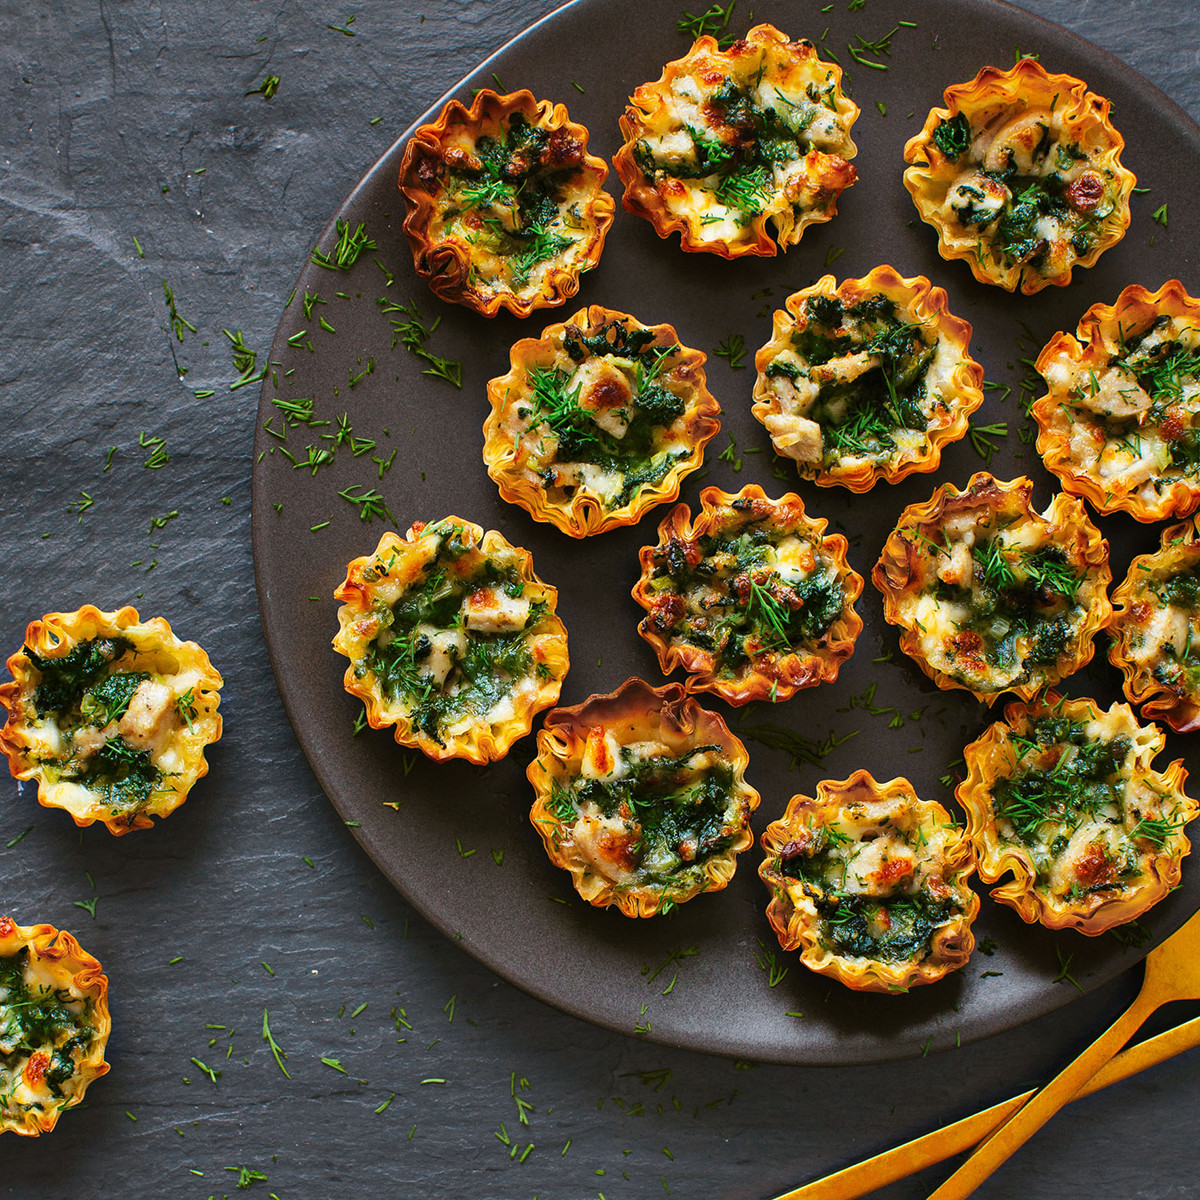 Spinach-Goat Cheese Phyllo Cups